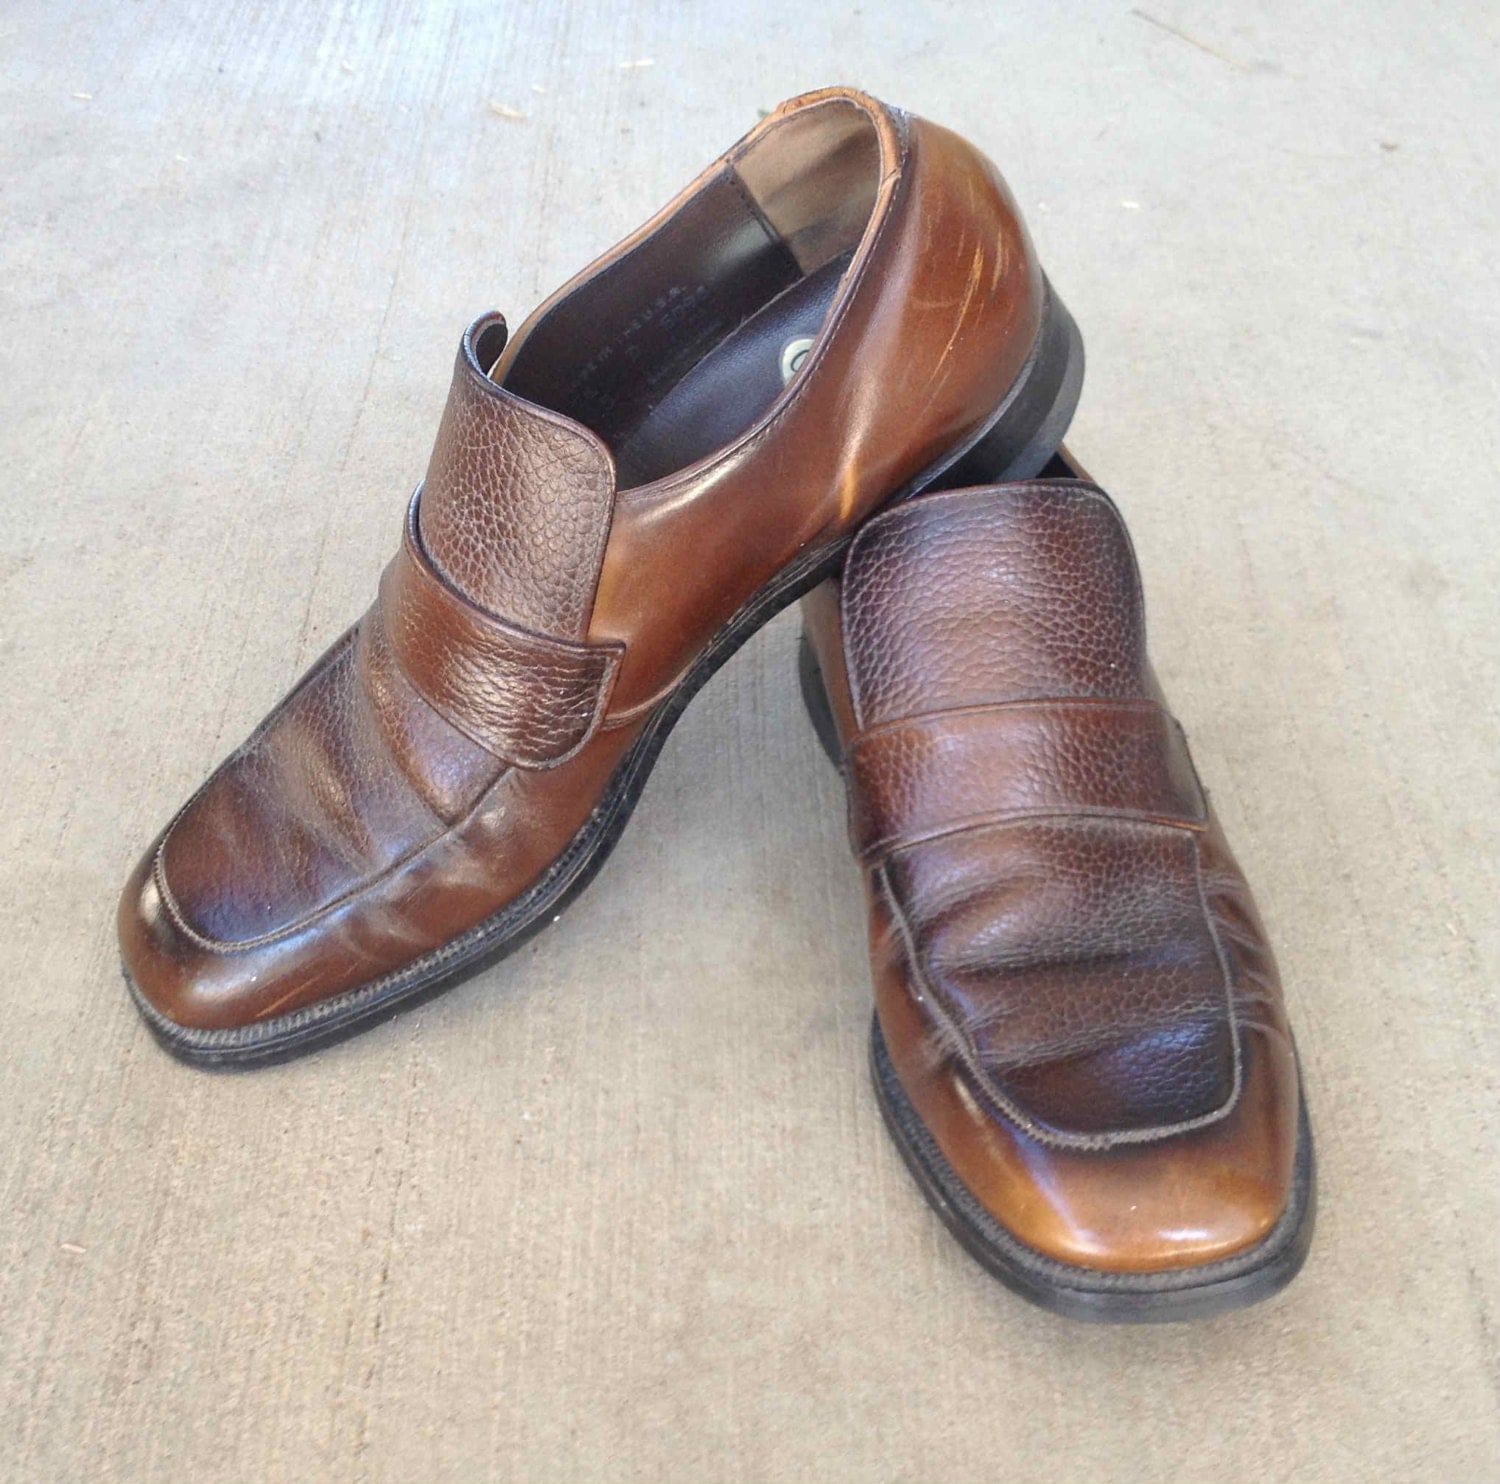 Calumet Mens Dress Shoes // Dark Brown Caramel Leather Shoes with ...